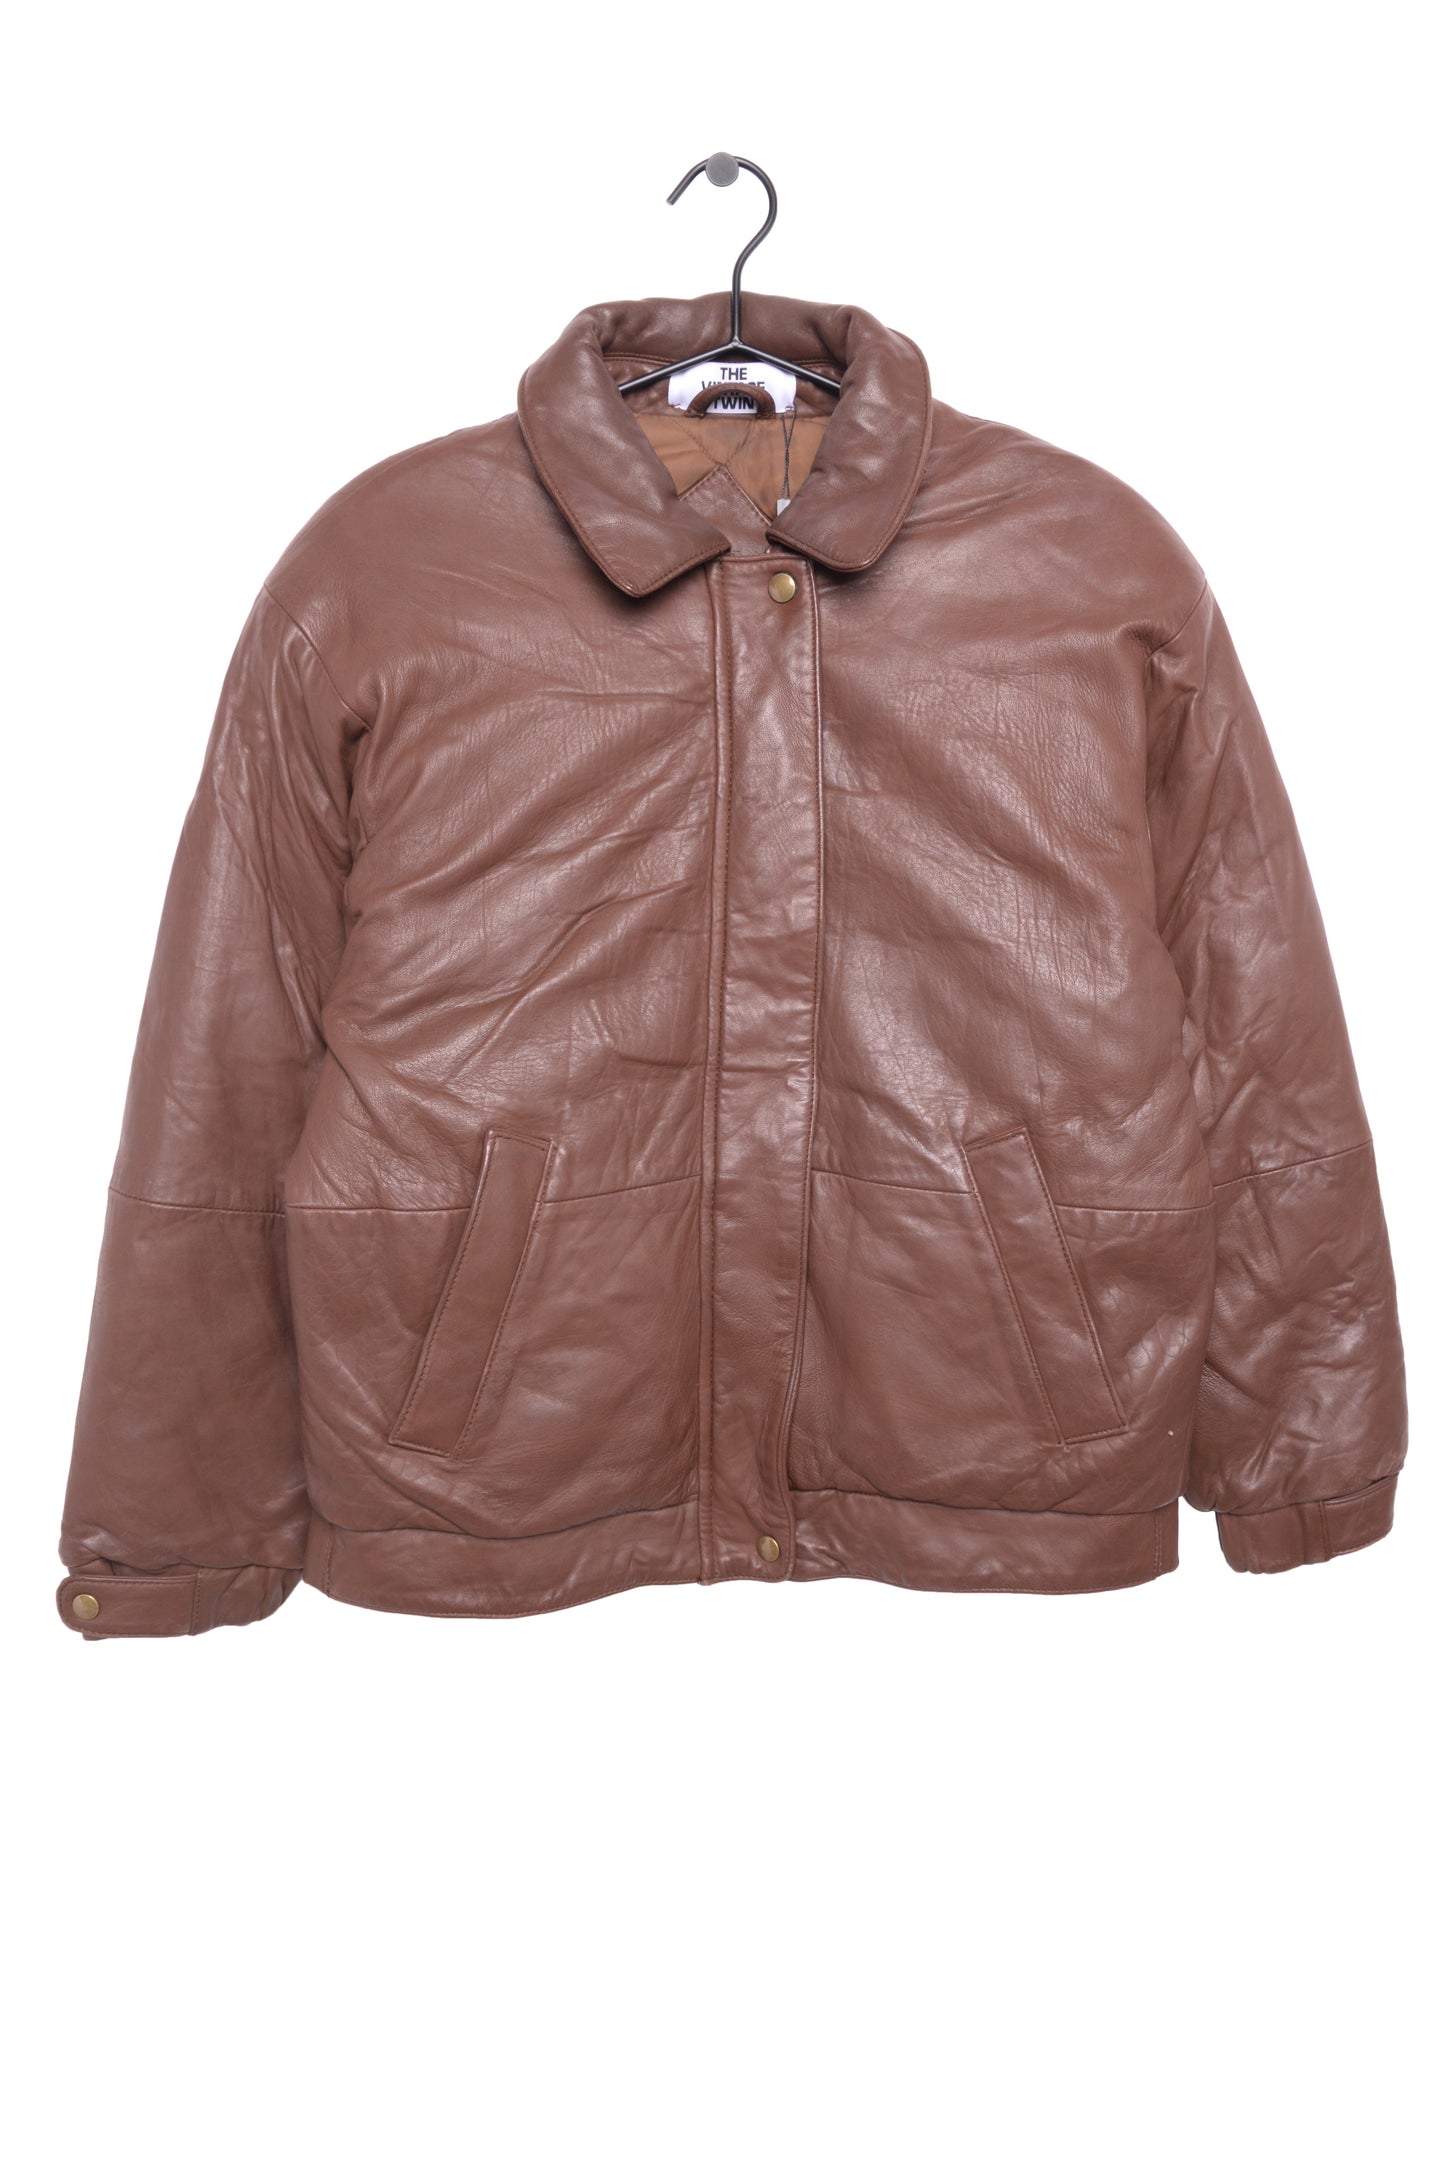 1990s Insulated Leather Bomber